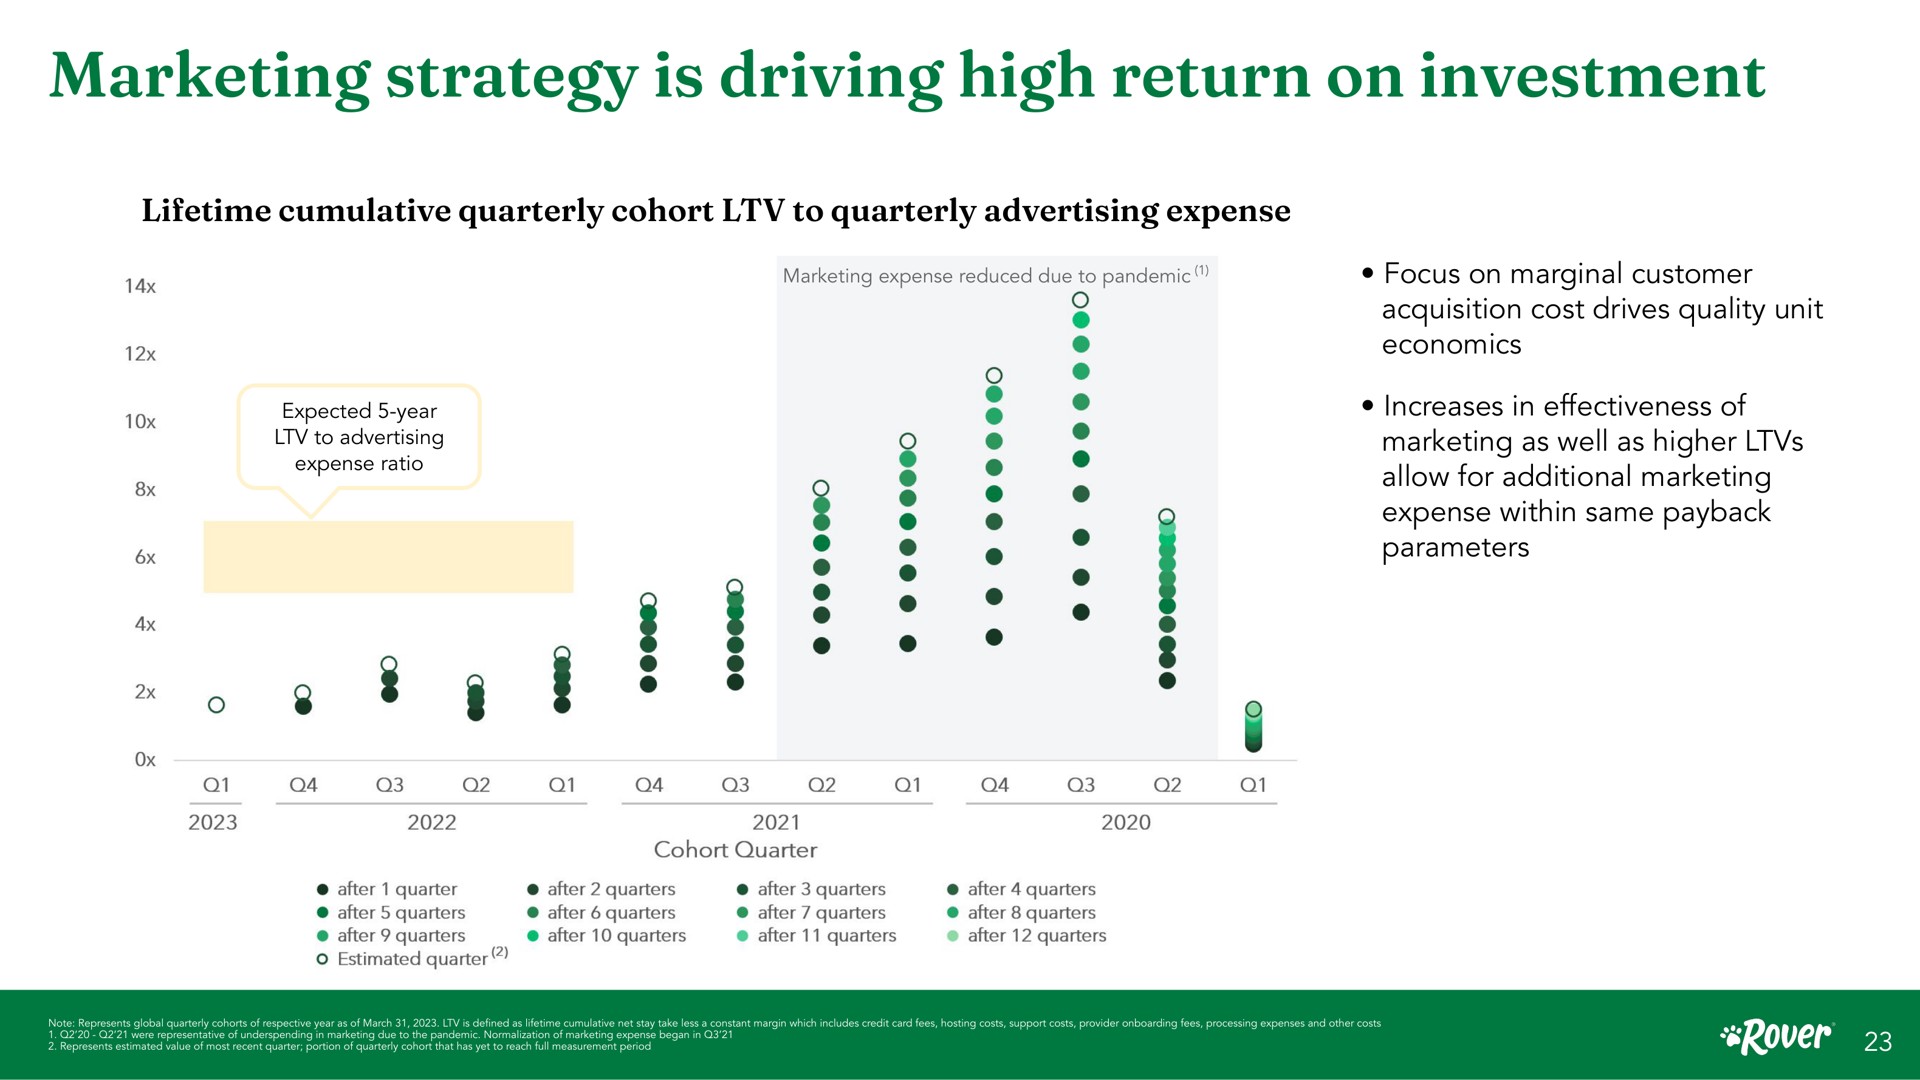 marketing strategy is driving high return on investment lifetime cumulative quarterly cohort to quarterly advertising expense a expense reduced due to pandemic focus marginal customer expected year to advertising expense ratio a cohort quarter acquisition cost drives quality unit economics increases in effectiveness of i as well as higher allow tor expense within same parameters after quarter after quarters after quarters estimated quarter after quarters after quarters after quarters after quarters after quarters after quarters quarters after after quarters after quarters credit card fees hosting costs support costs provider fees margin which includes note represents soy expenses and other costs cane cumulative net stay processing global less a as defined take lifetime constant | Rover